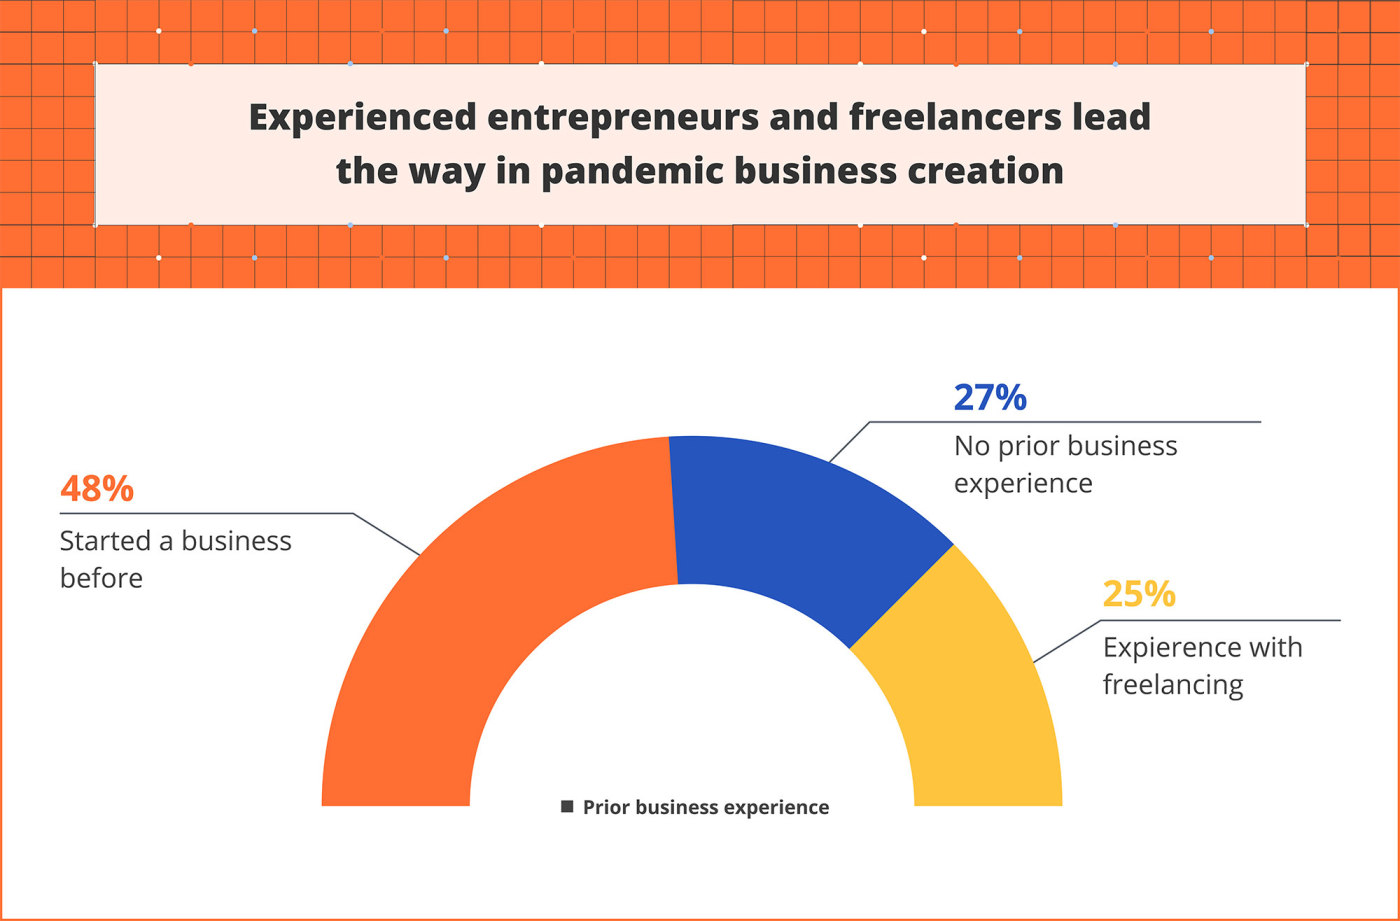 A graph showing that 48% of people who started a business during the pandemic had also started one previously; 25% had previous experience freelancing